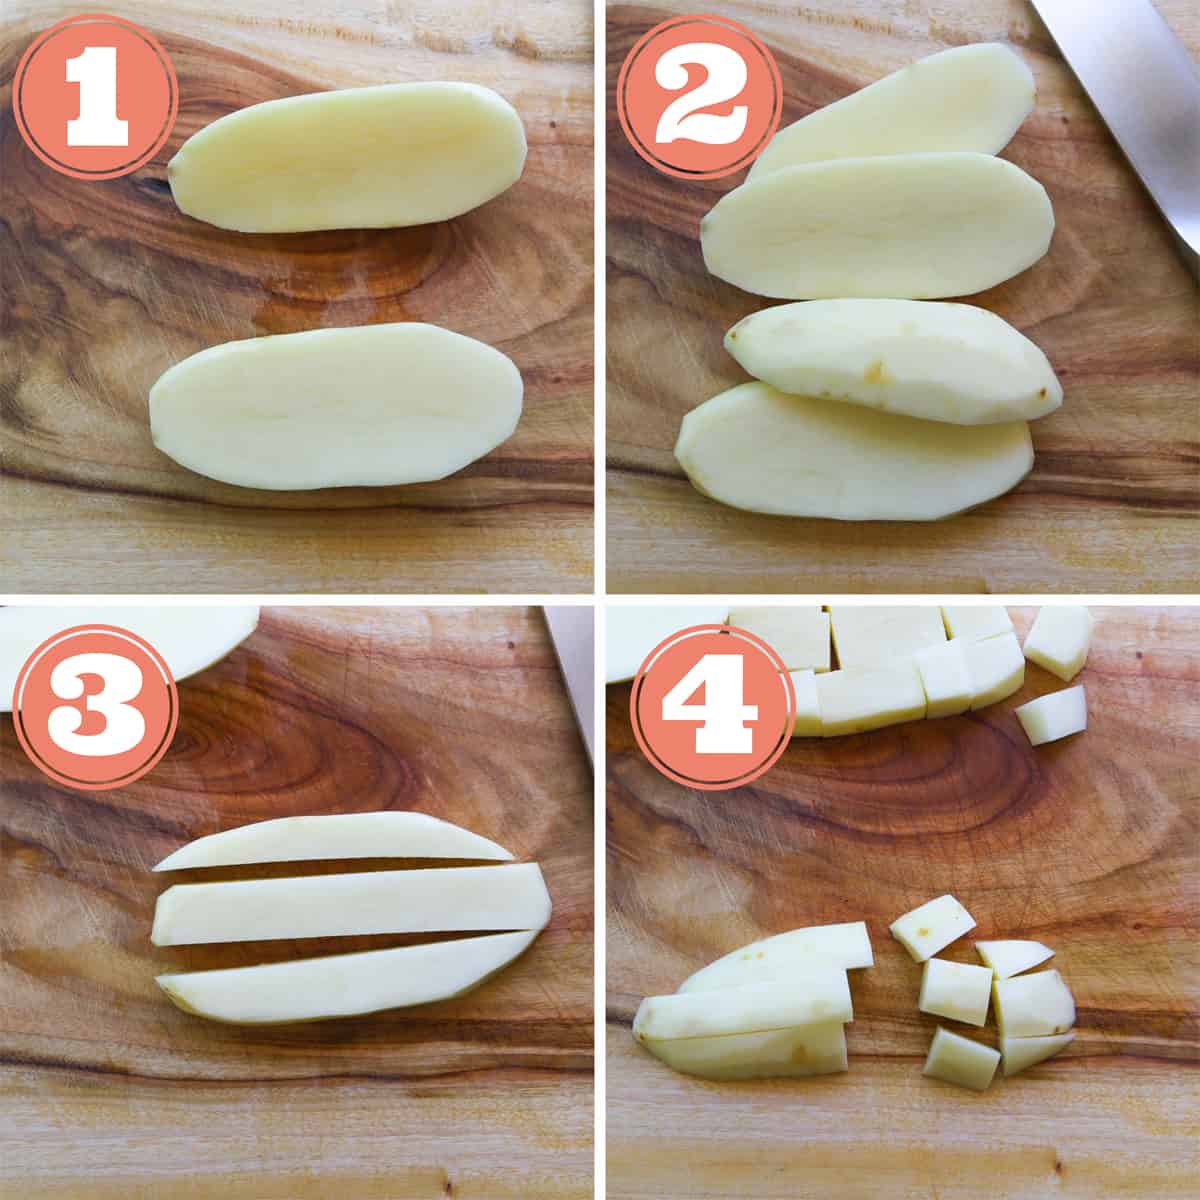 4 grid image. First grid one potato cut in half. Second grid potato cut in fours. Third grid potato piece cut in thirds lengthwise. Fourth grid potatoe piece cut into 1 inch cubes.